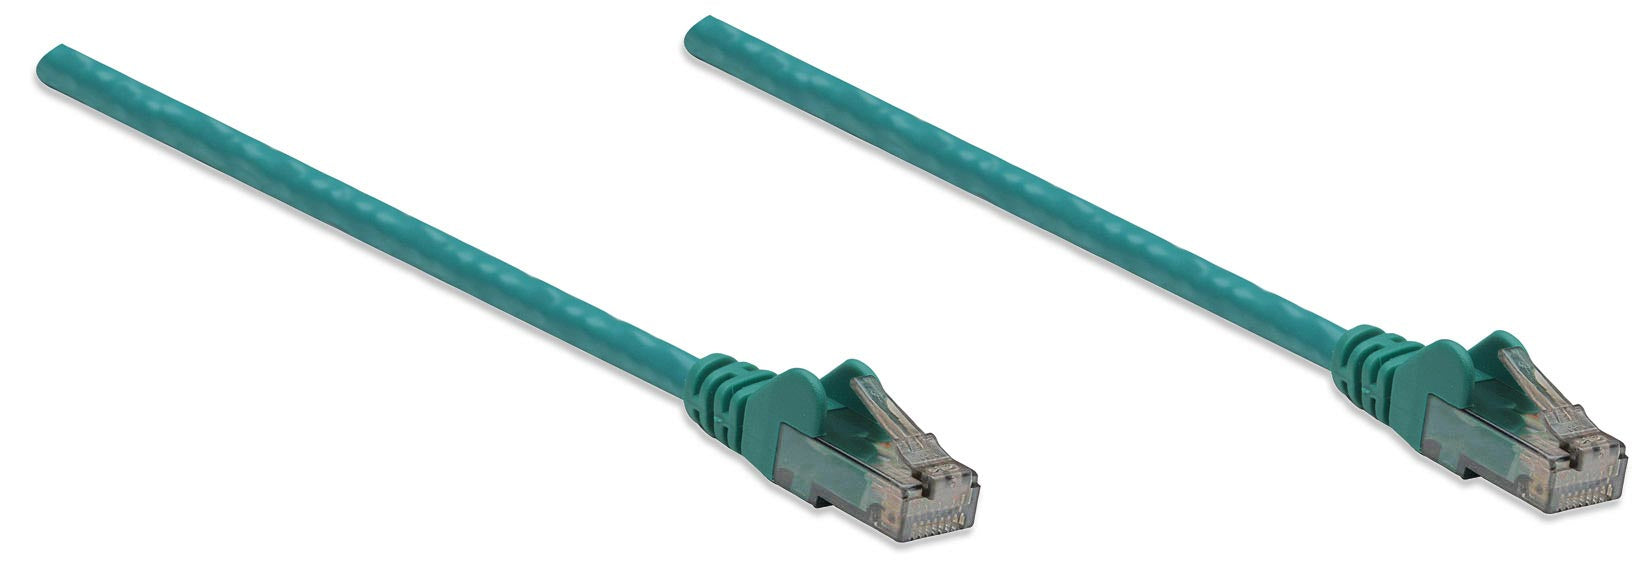 Intellinet Network Patch Cable, Cat6, 10m, Green, CCA, U/UTP, PVC, RJ45, Gold Plated Contacts, Snagless, Booted, Lifetime Warranty, Polybag